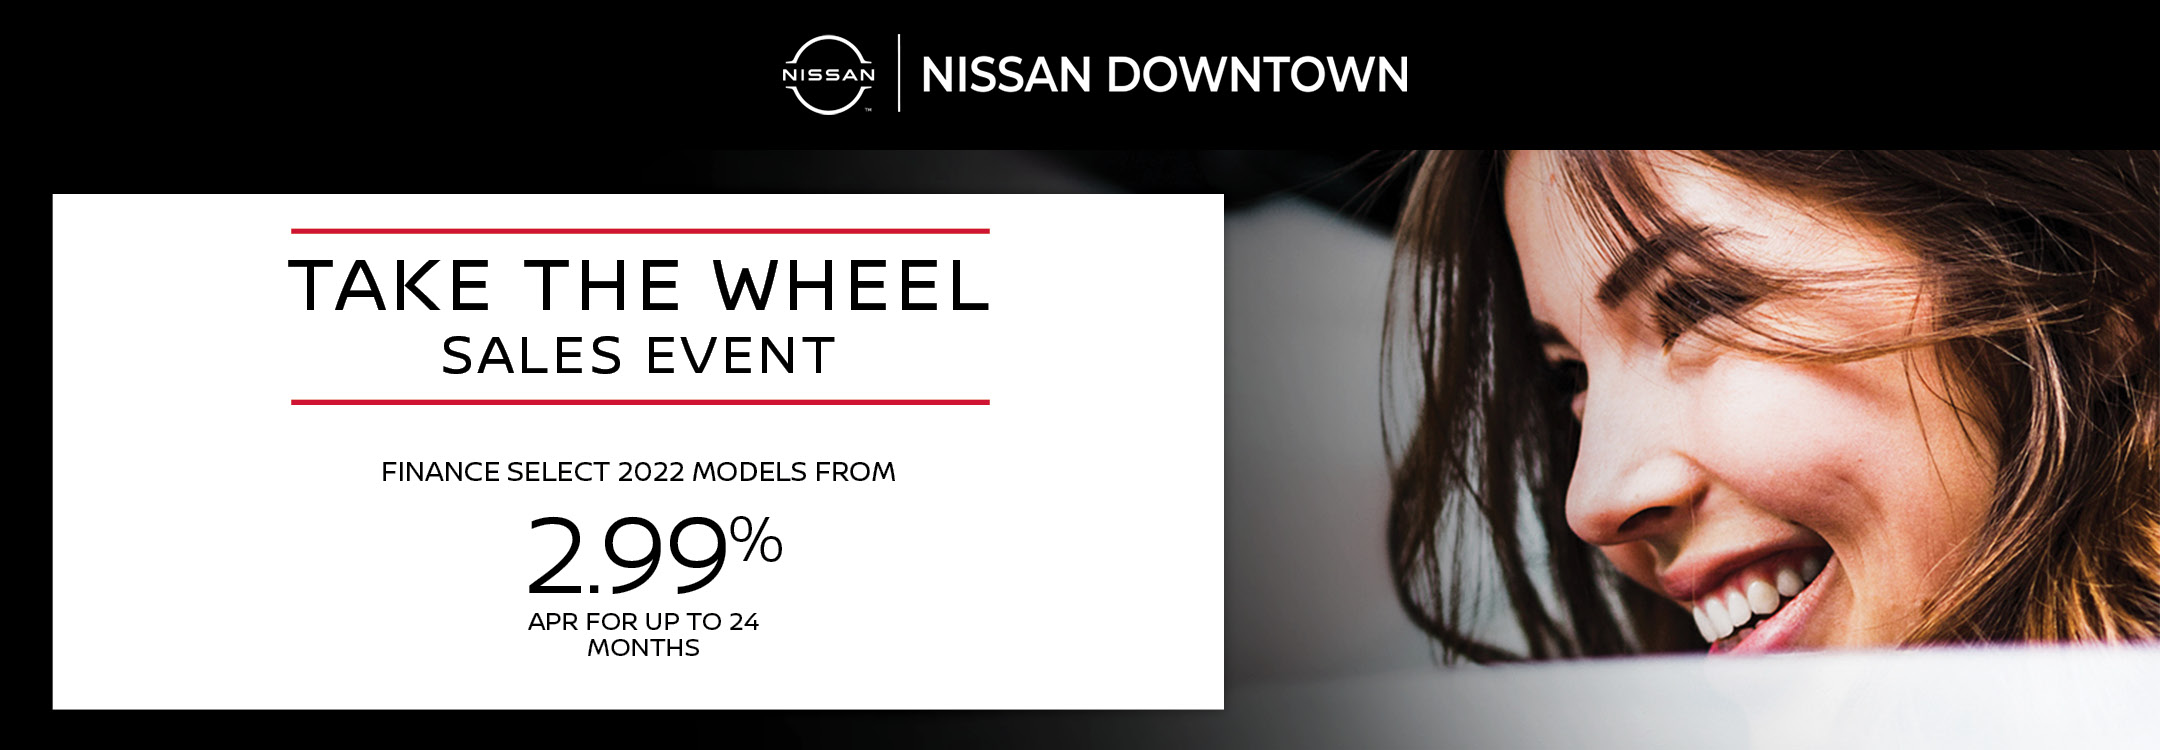 Take the wheel Sales Event at Nissan Downtown in Toronto, ON